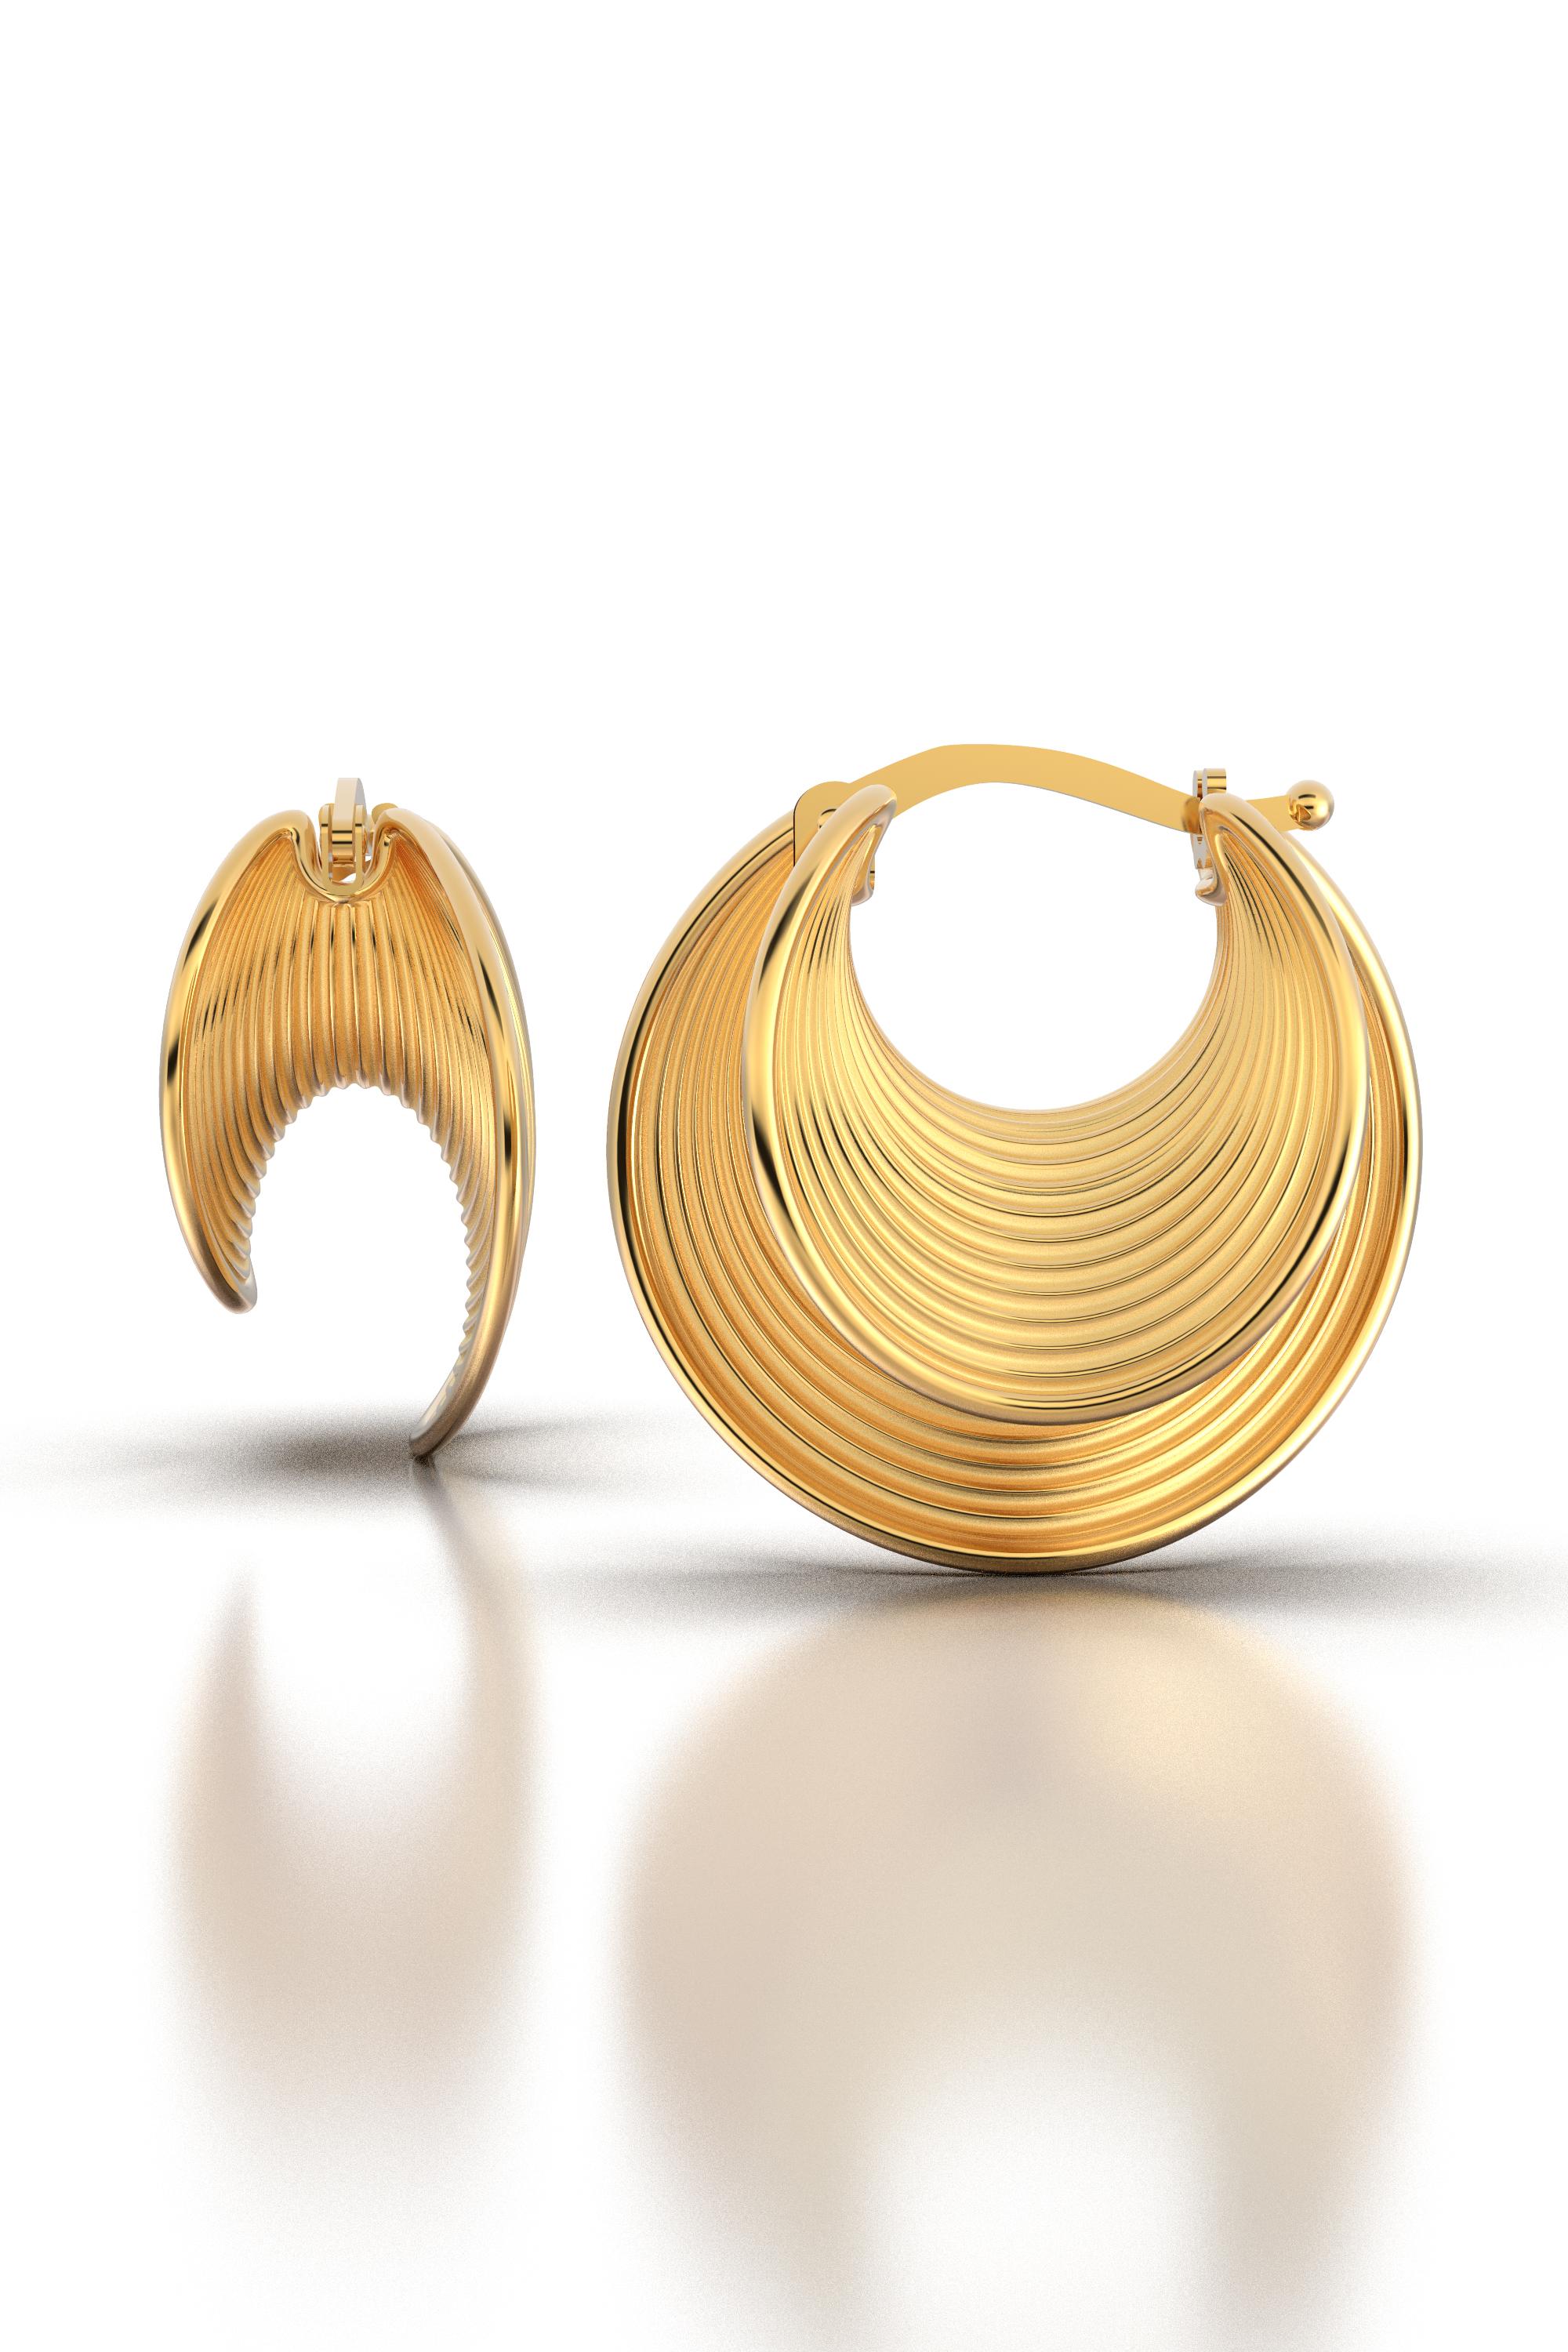 21 mm diameter beautiful hoop earrings crafted in polished and raw solid gold 18k 
Available in yellow gold, rose gold and white gold, 18k or 14k on request.
The earrings are secured by a trusty snap closure.
The approximate total weight is 5,8